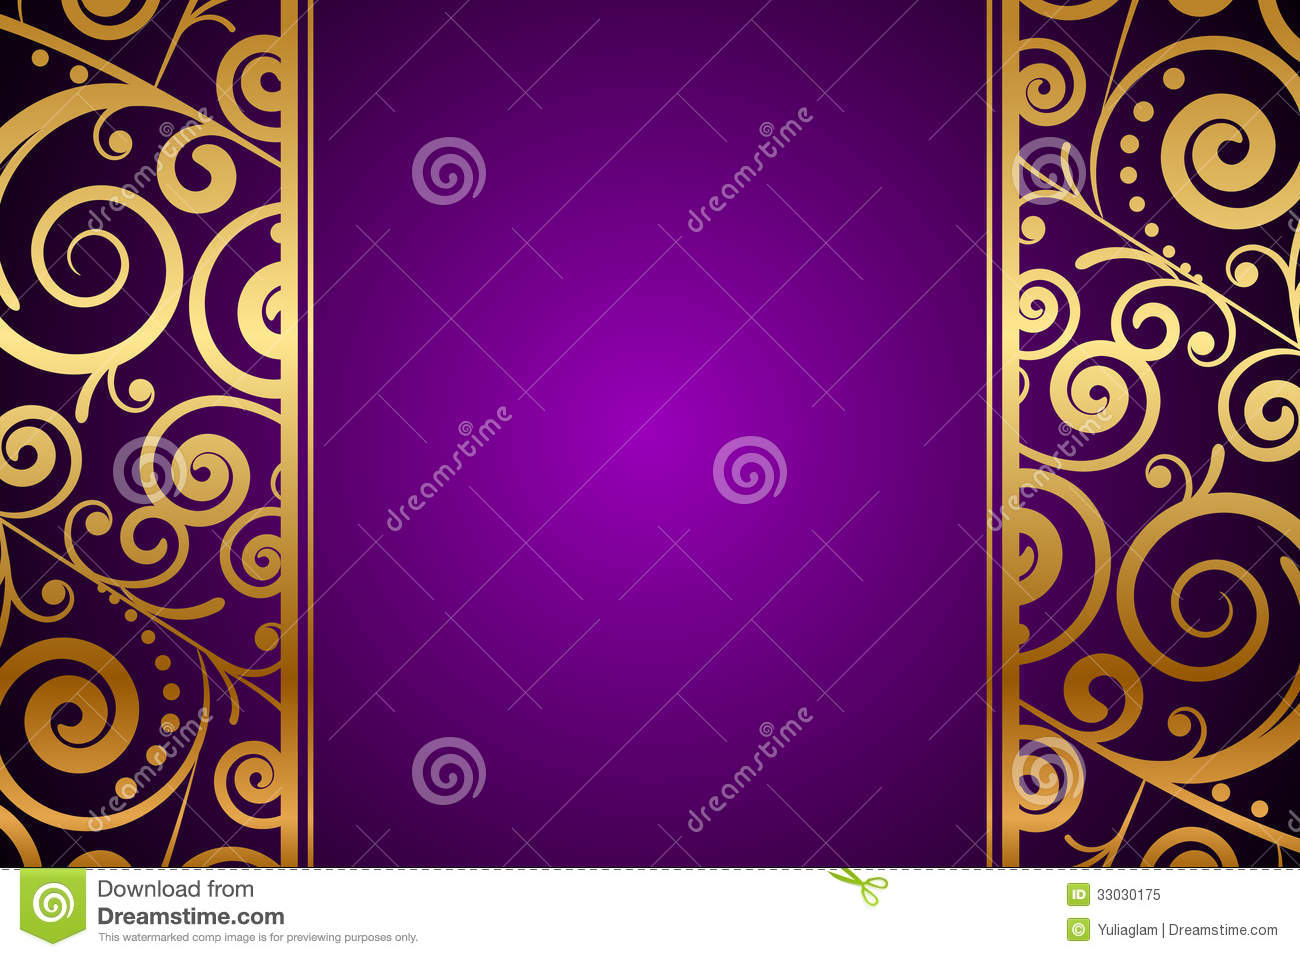 20 Gold And Purple Background Vector Images   Purple and